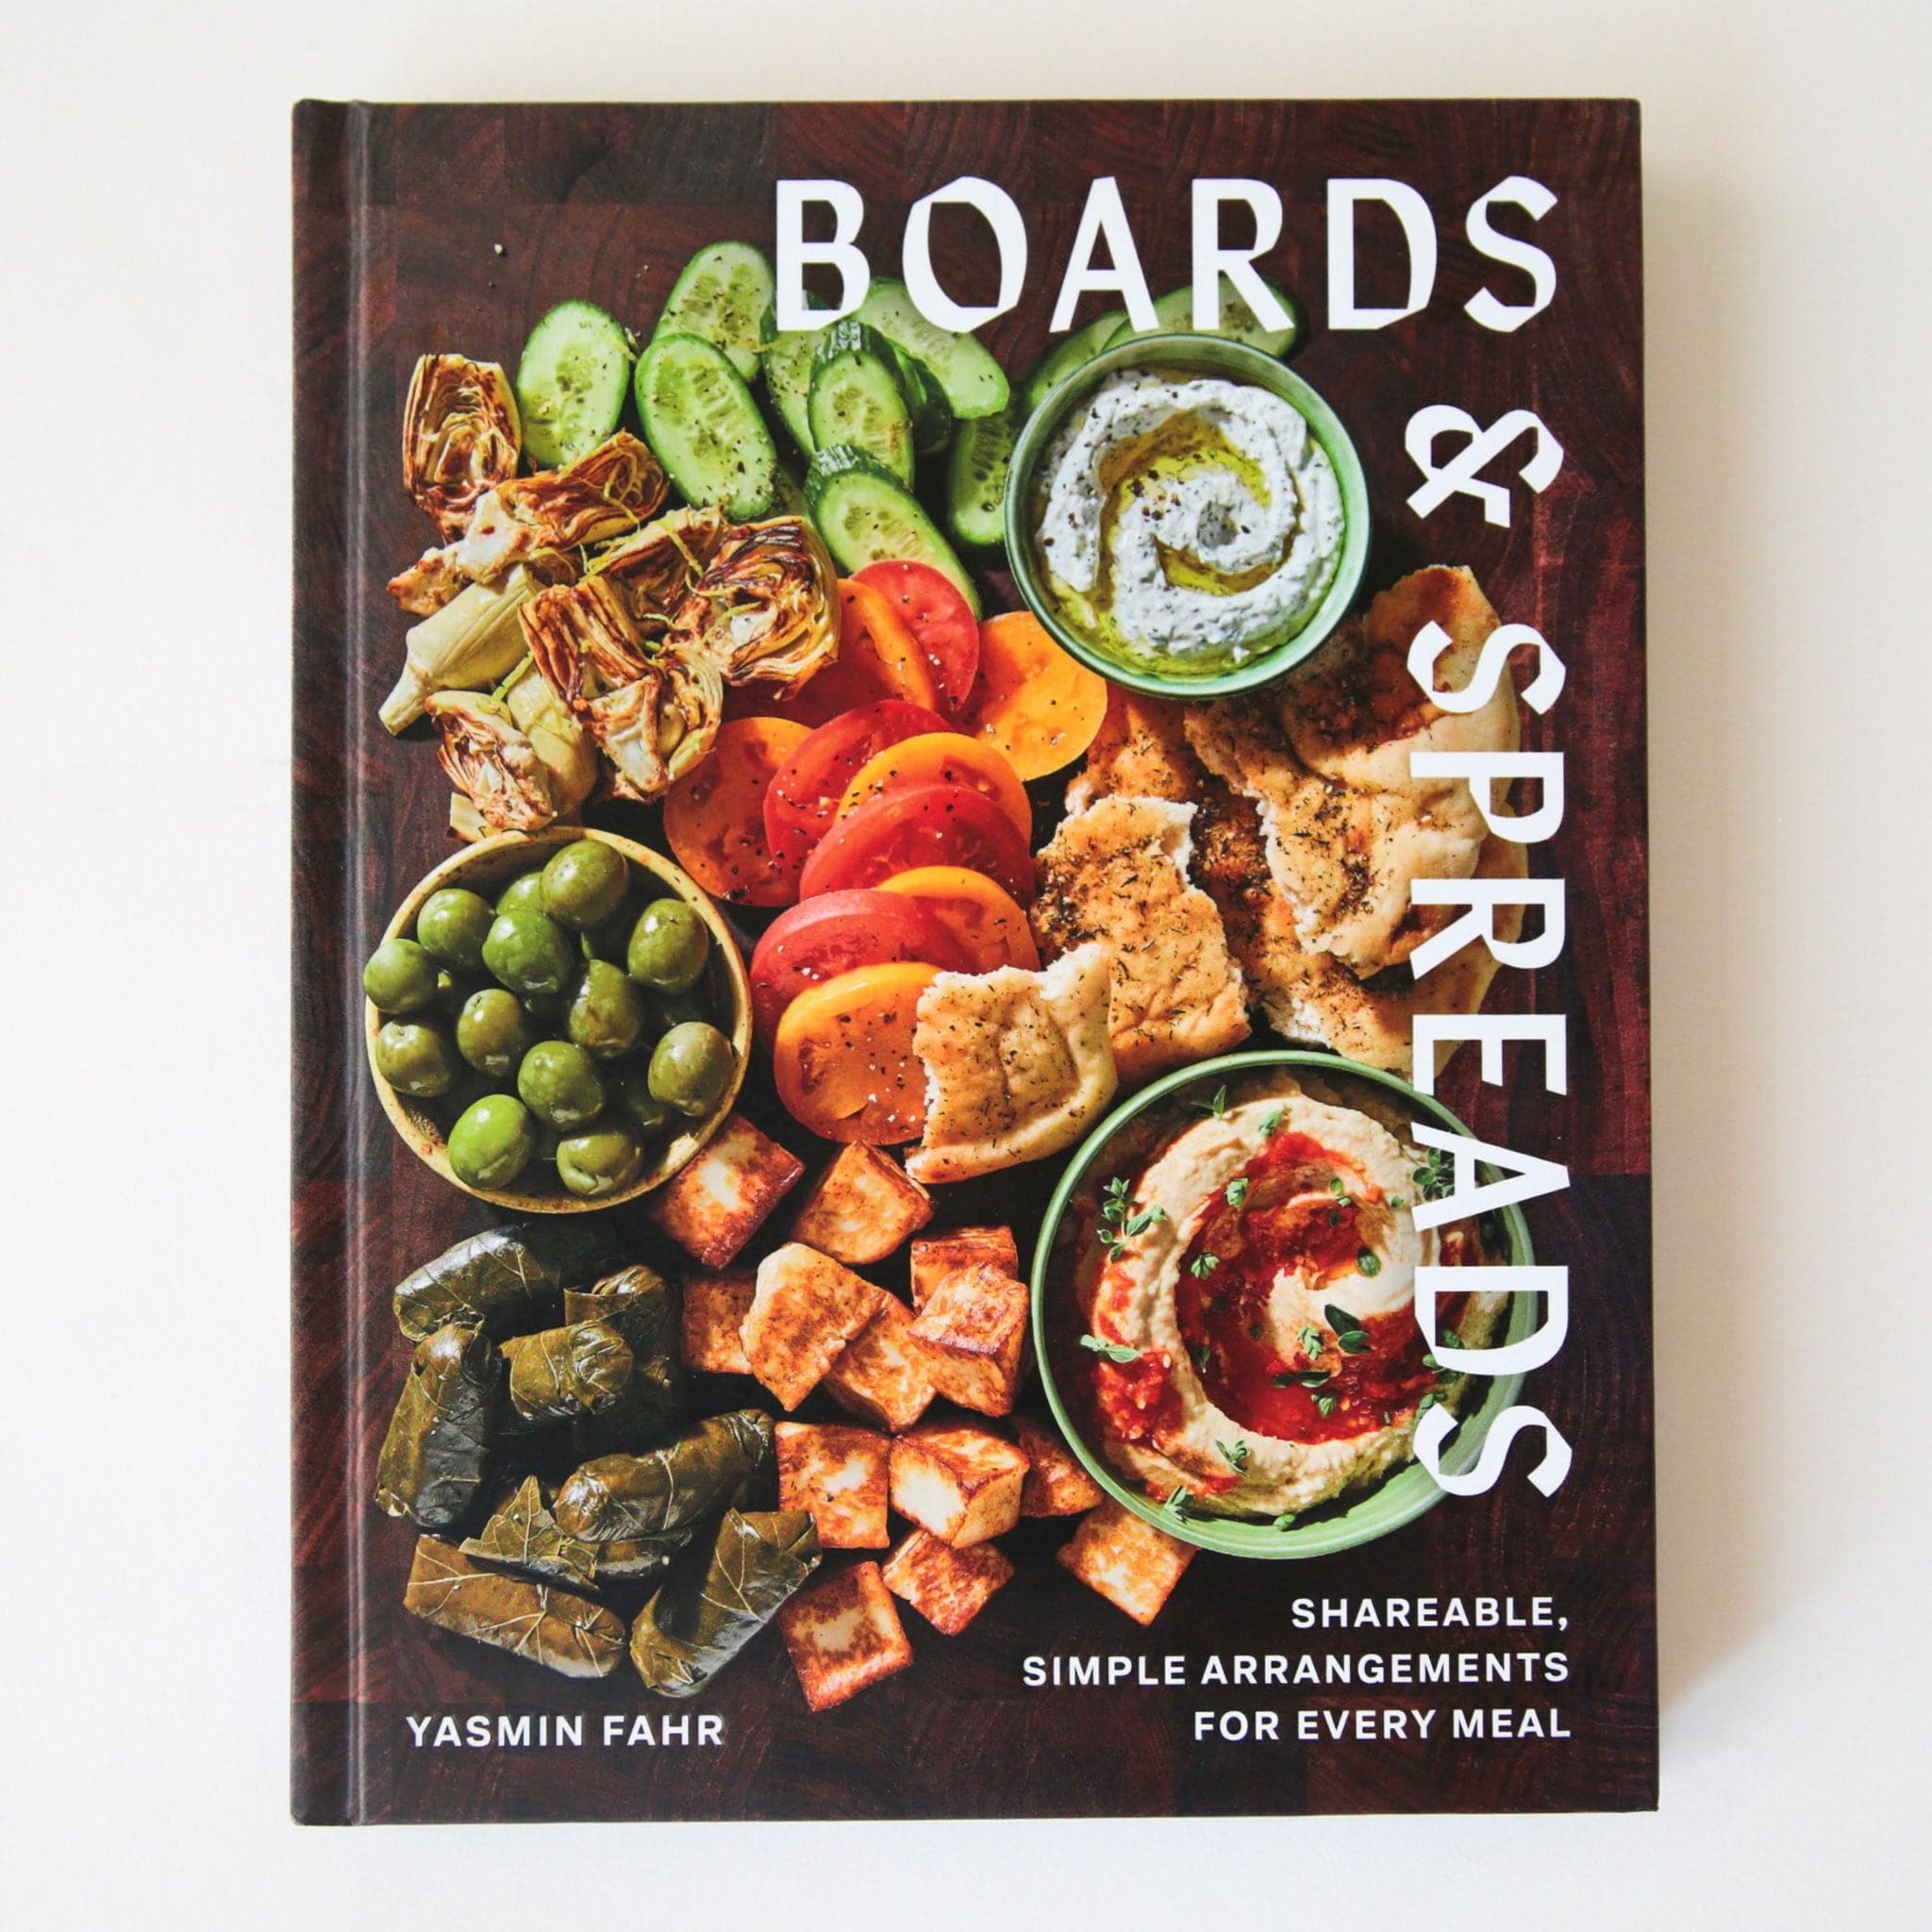 A book covering mimicking the look of a cutting board with a variety of charcuterie style foods, like olives, spreads, veggies and more. 